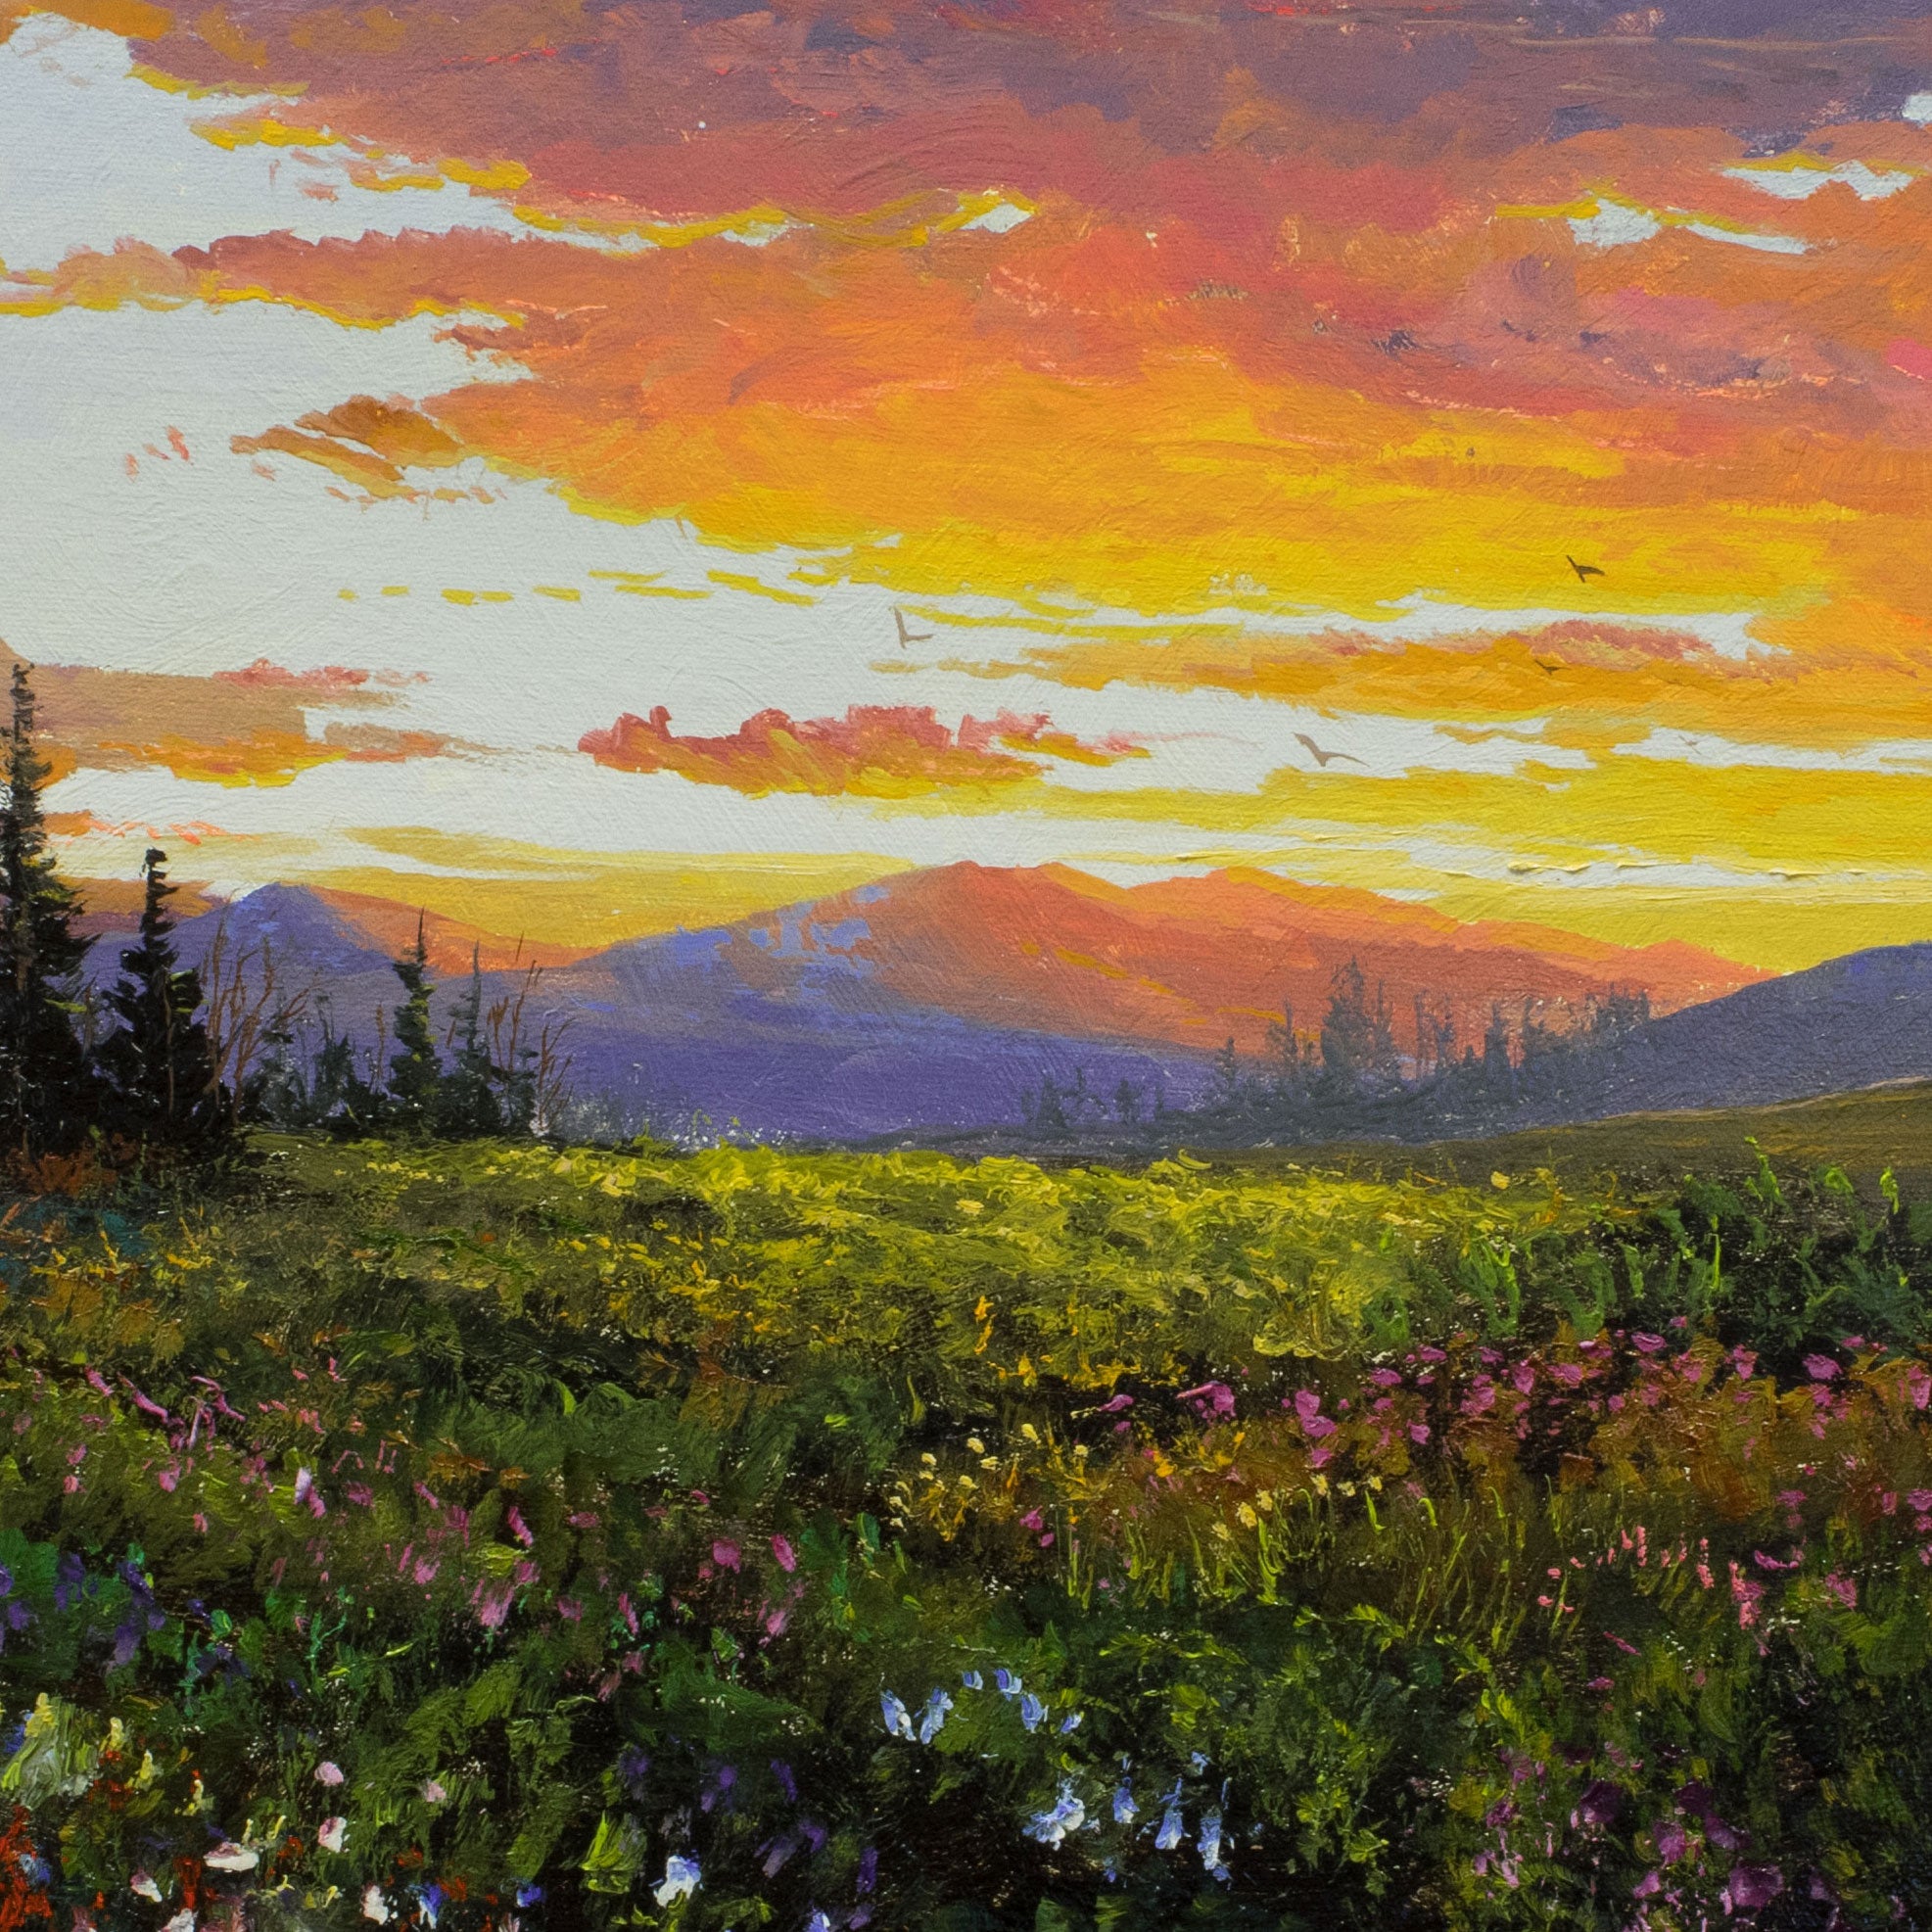 Sunset and Flowers - Summer by Thomas deDecker